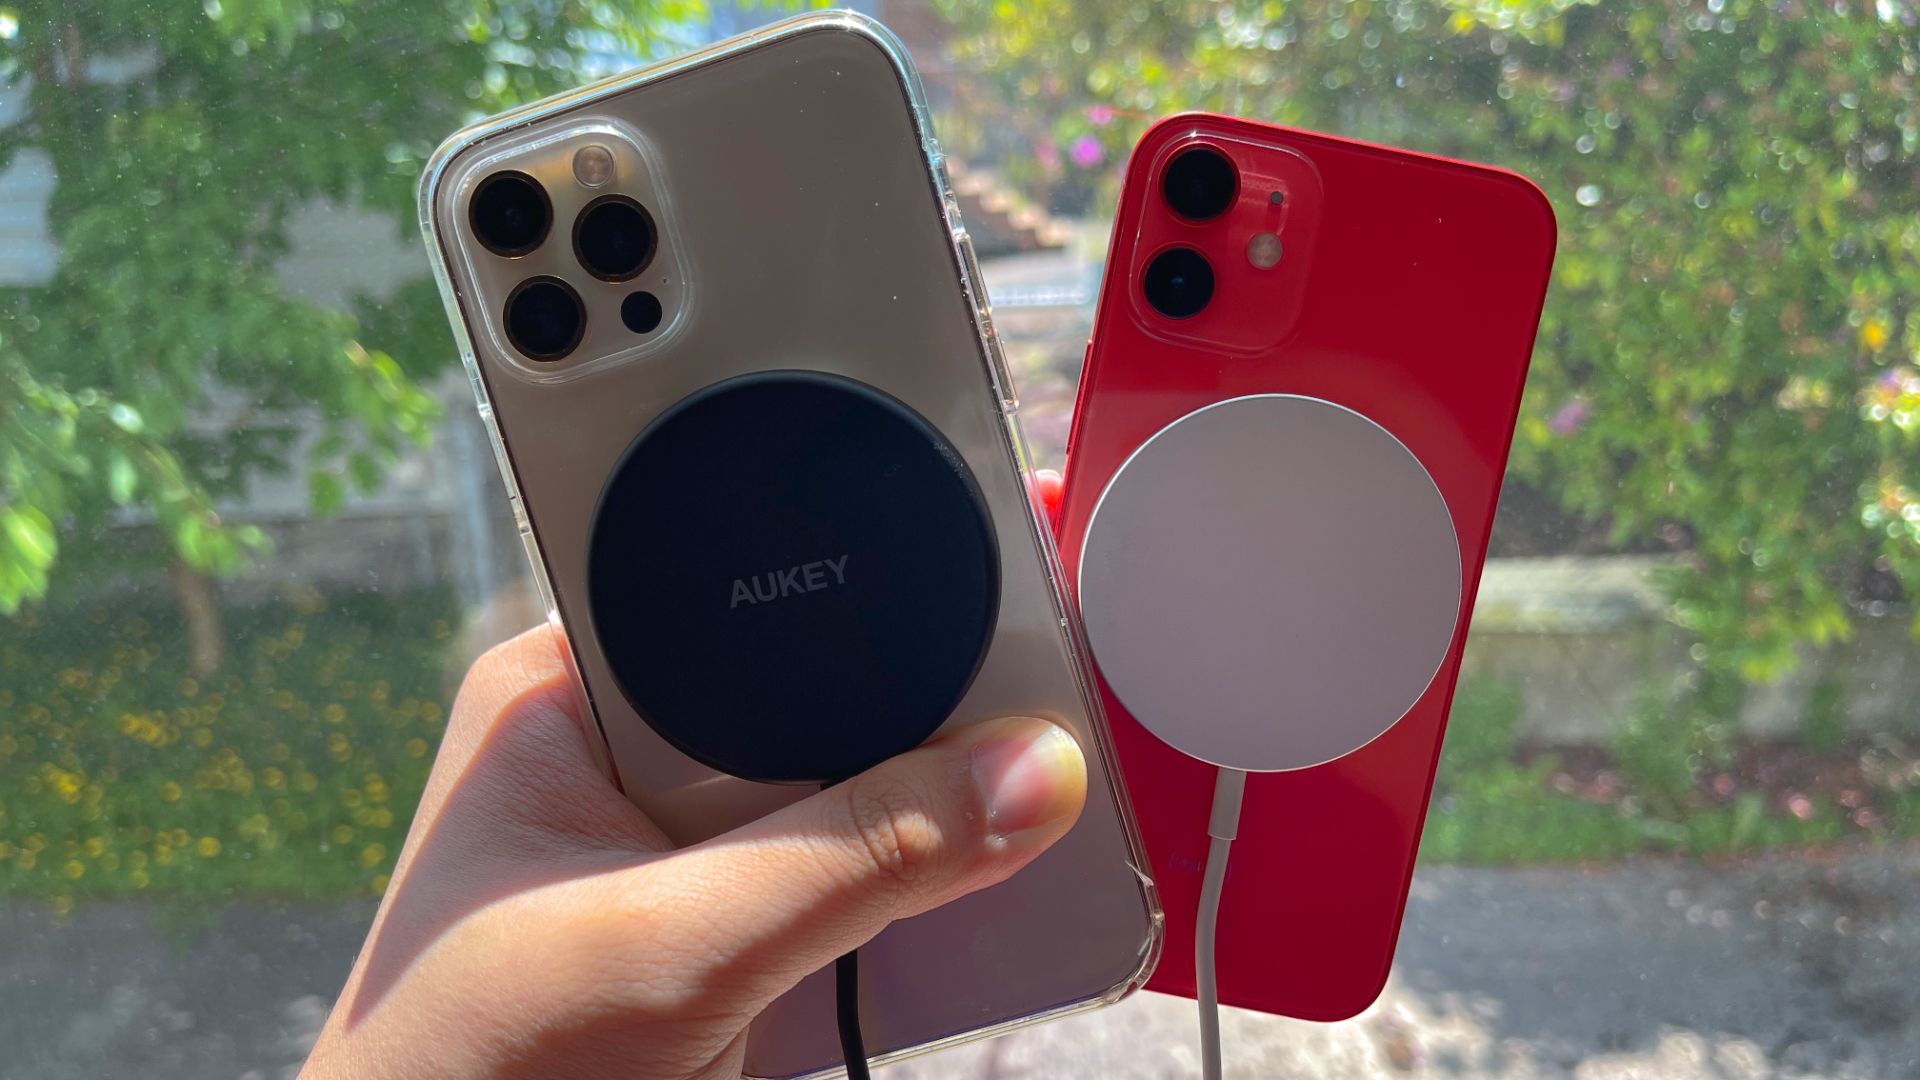 aukey aircore versus Apple MagSafe charger